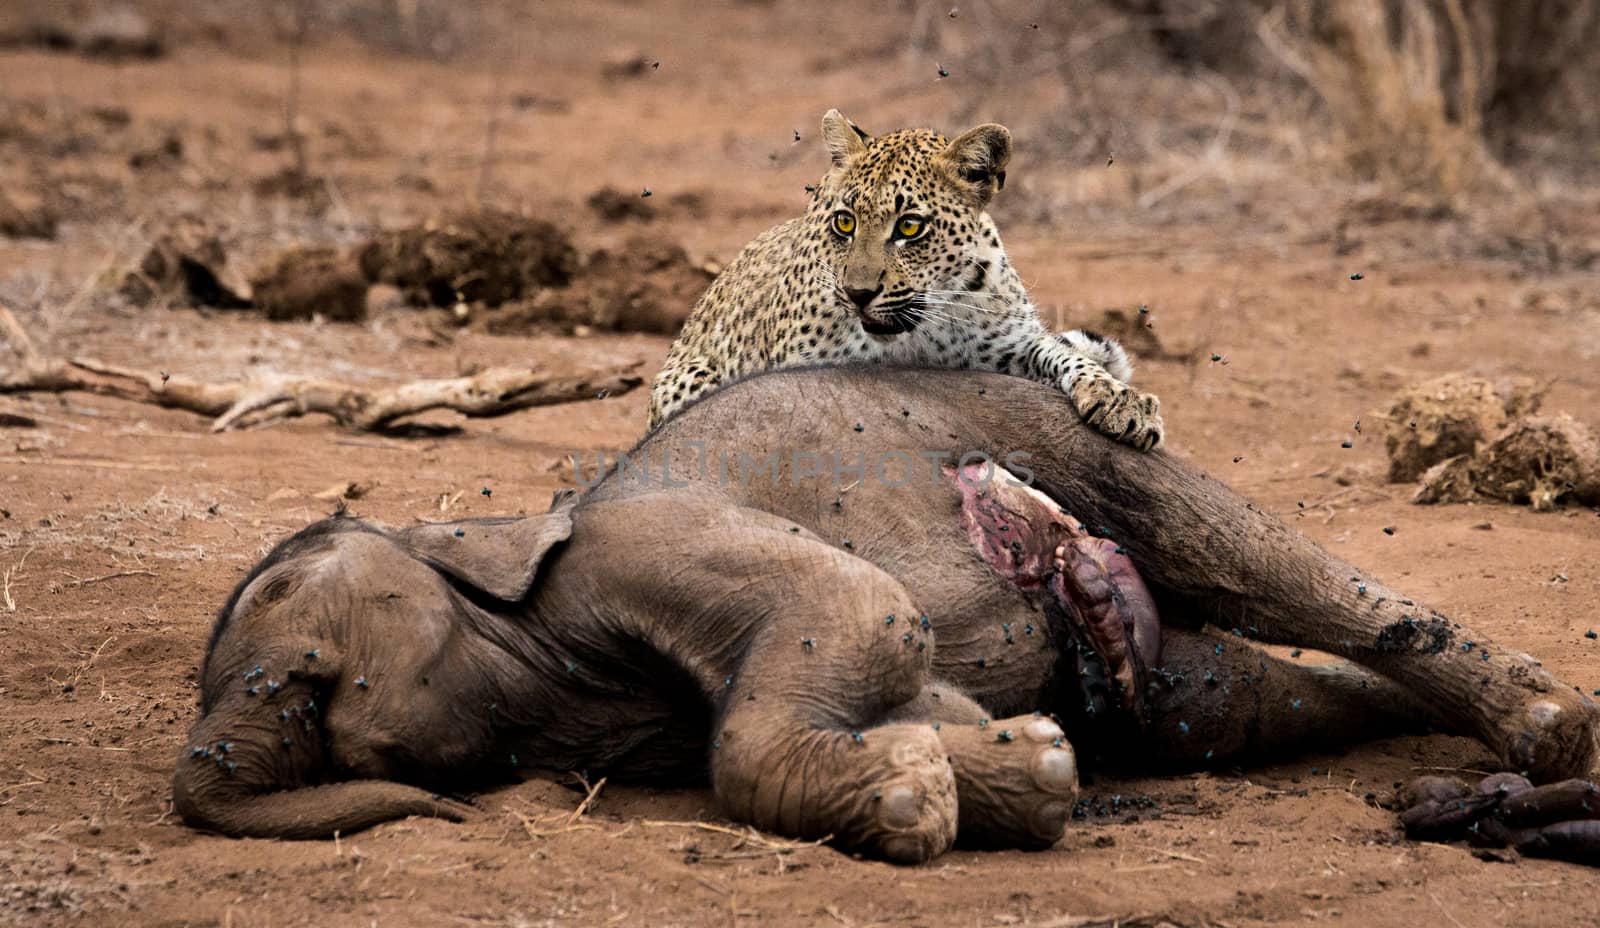 Leopard feeding on a baby Elephant carcass in the Kruger National Park, South Africa.